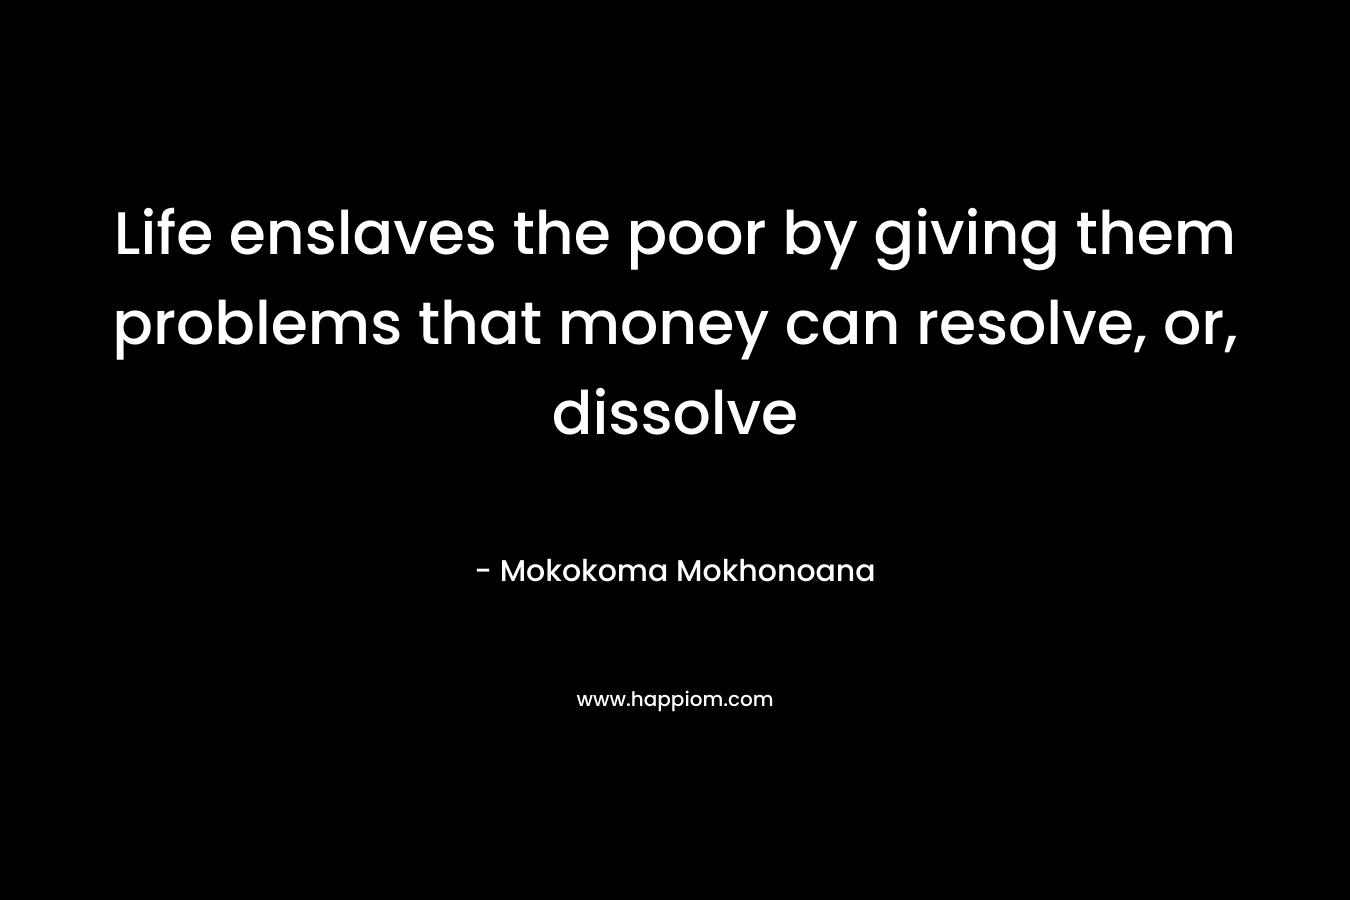 Life enslaves the poor by giving them problems that money can resolve, or, dissolve